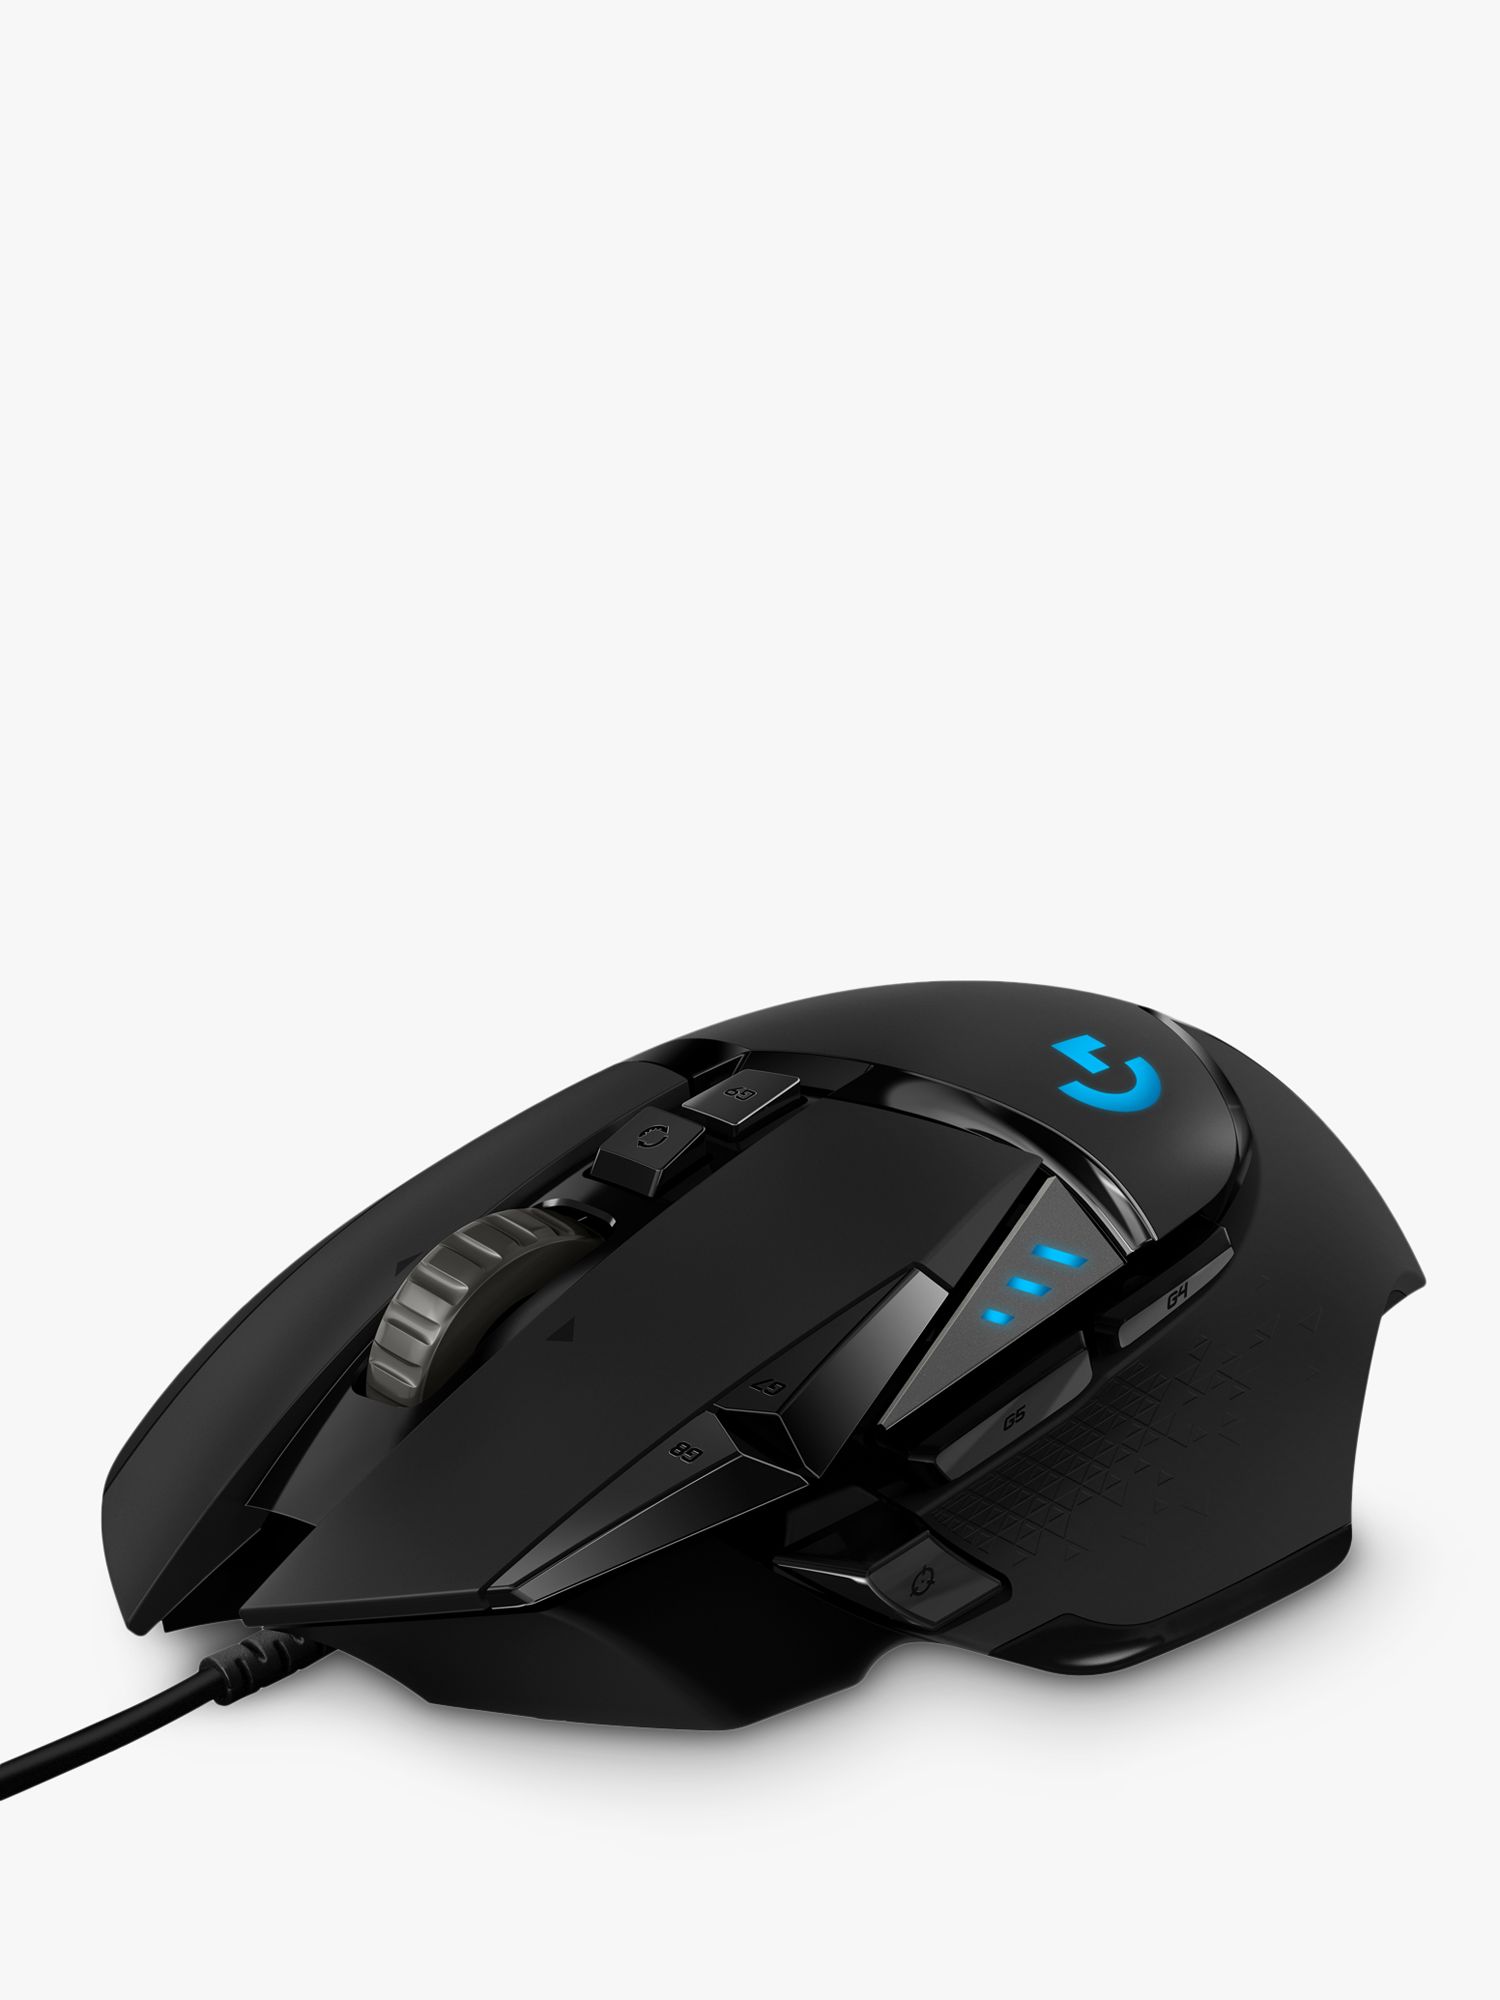 G502 Hero Mouse